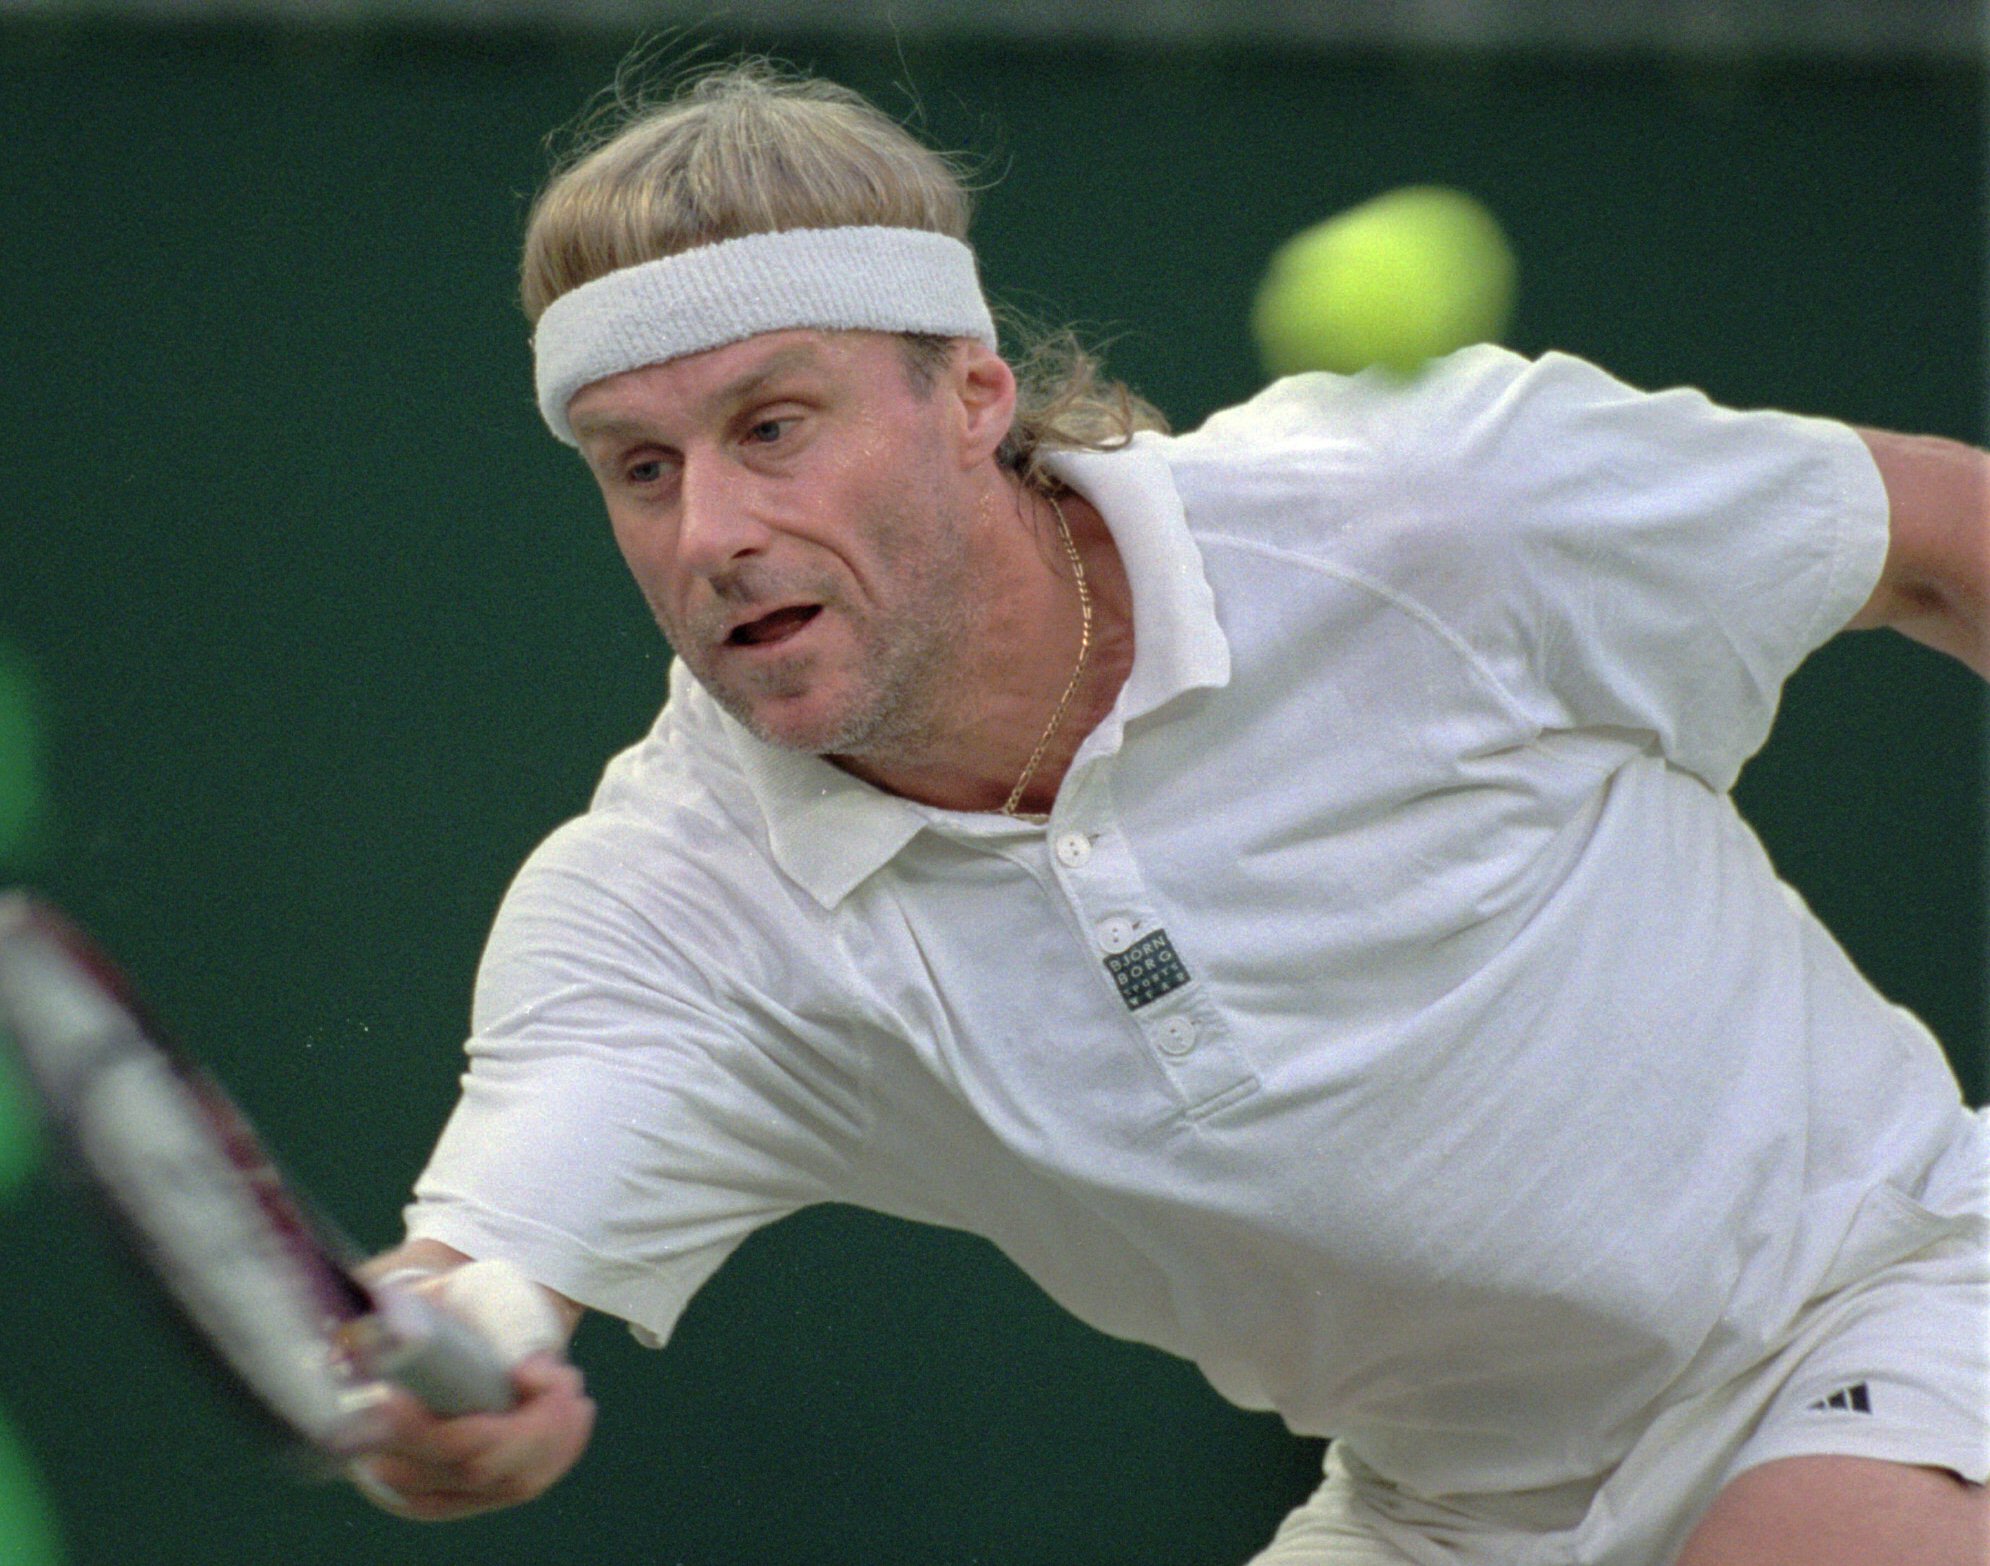 Why Did Björn Borg Retire So Early in His Tennis Career?